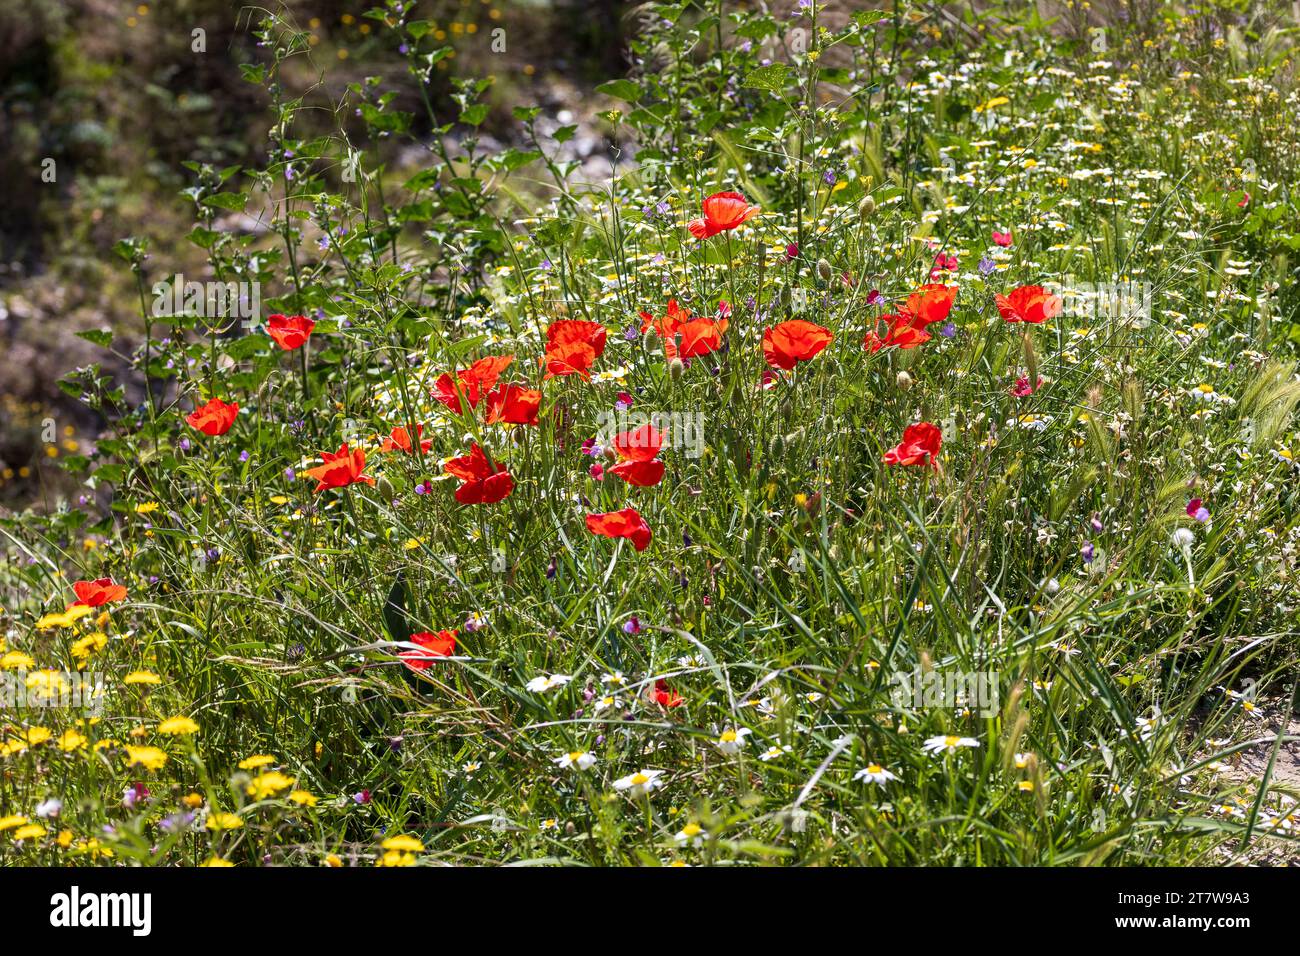 Wild Flowers Growing in the Spanish Countryside Stock Photo